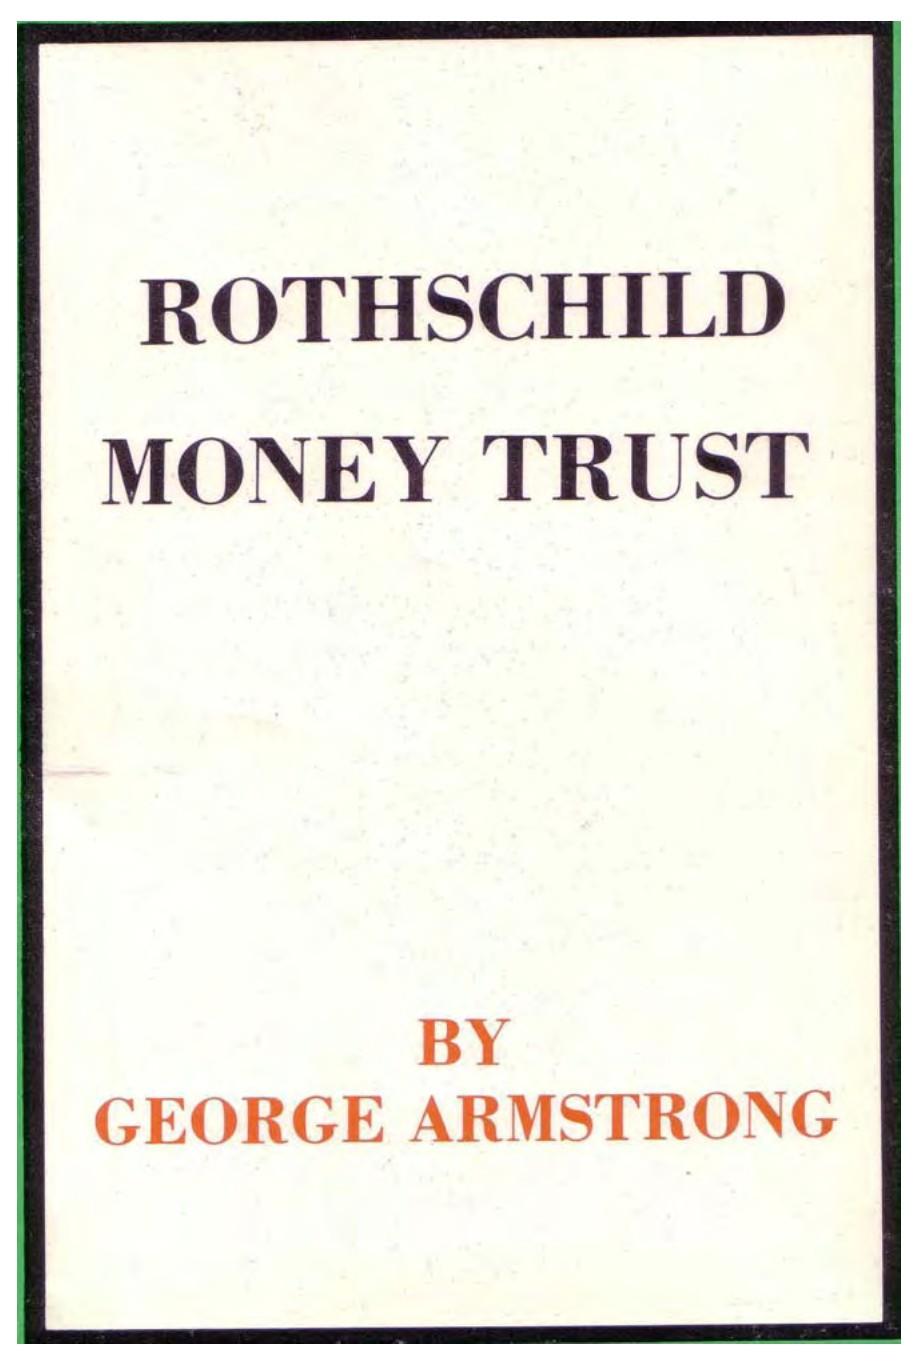 Rothschild Money Trust (1940) by George Armstrong